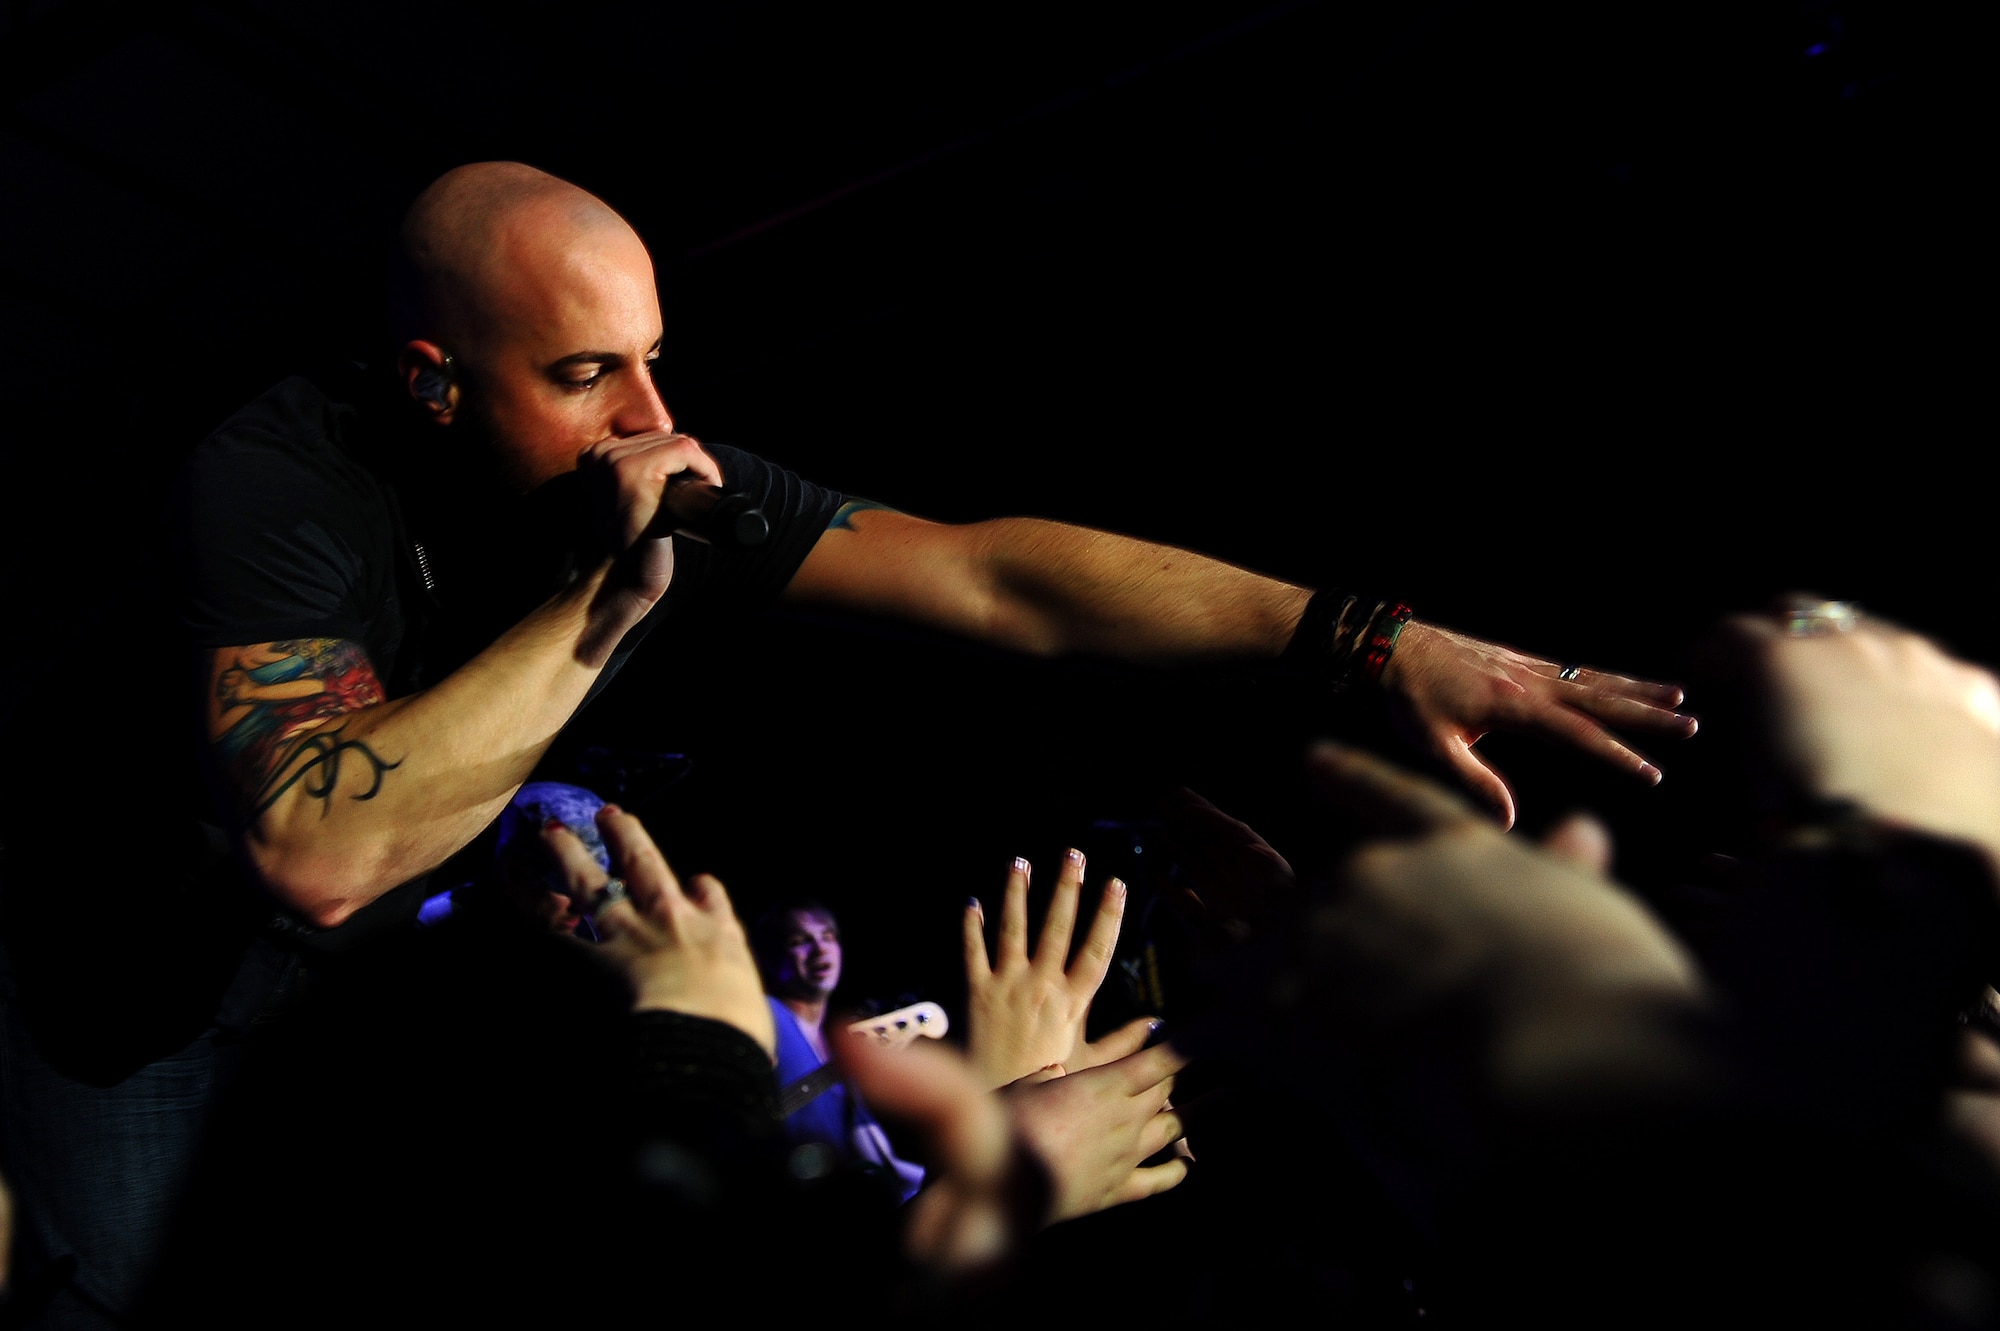 Chris Daughtry, lead singer of the rock band Daughtry, reaches for fans during a concert for service members at Ramstein Air Base, Germany, Dec. 10, 2011. The performers are on a 13-day tour playing six concerts that will take them through Southwest Asia and Europe to bring entertainment to American troops and their families as part of the Operation Seasons Greetings - Tour for the Troops 2011. (U.S. Air Force photo by Airman Brea Miller)